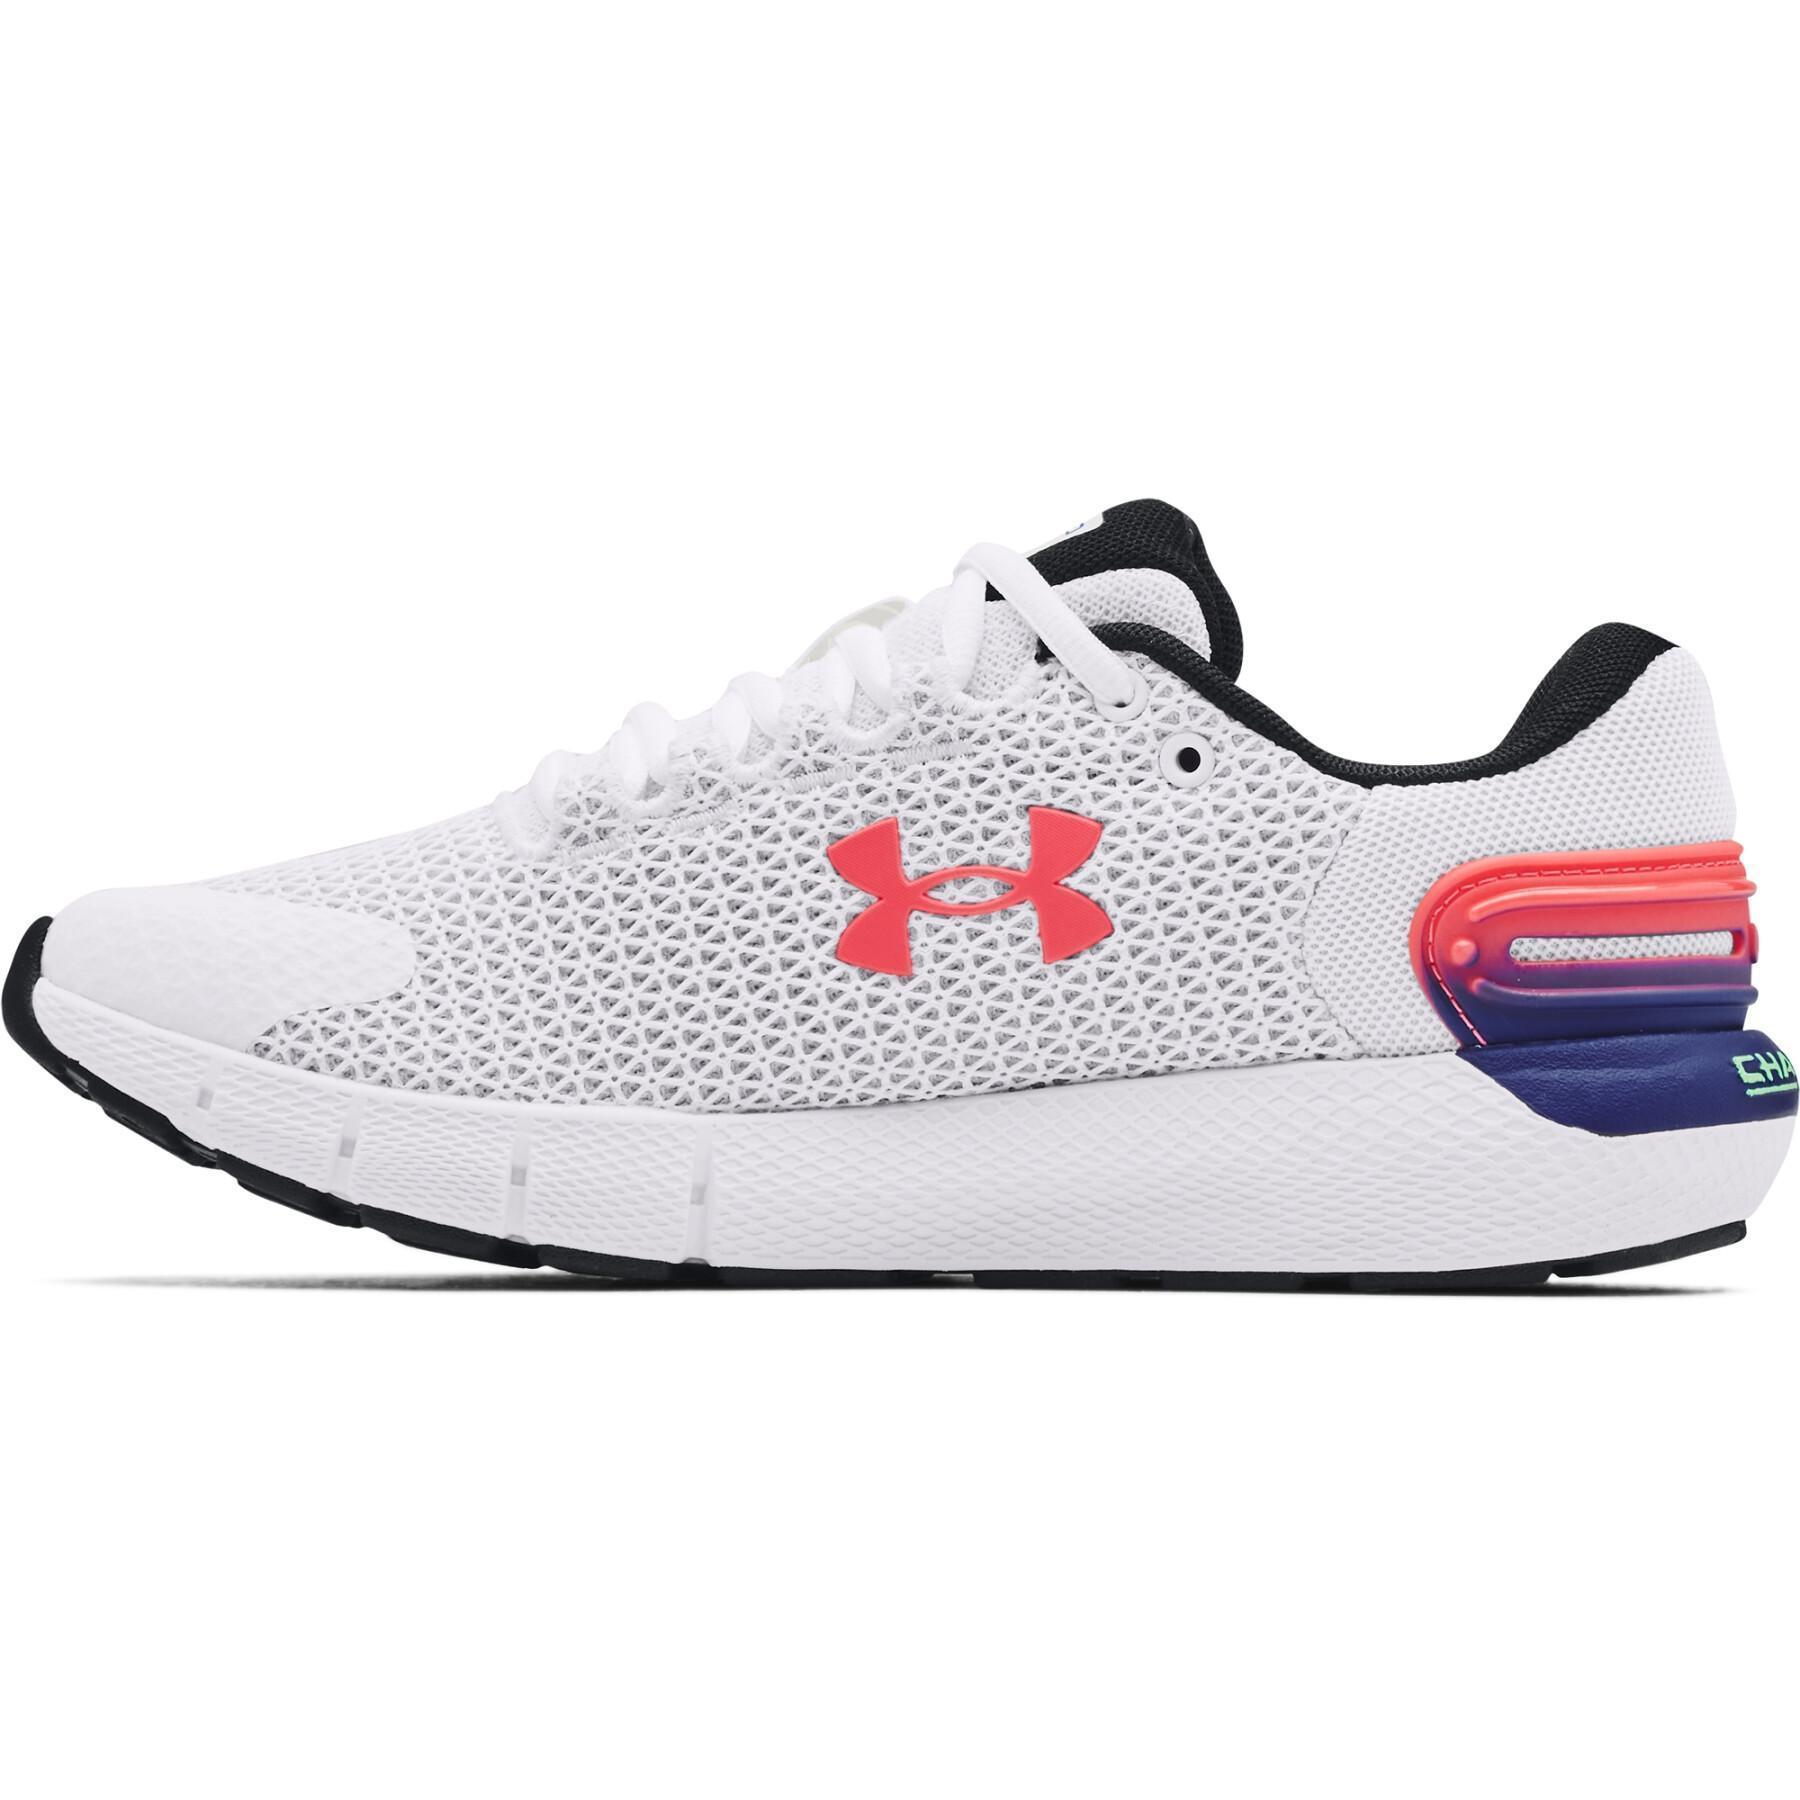 Chaussures de running femme Under Armour Charged Rogue 2.5